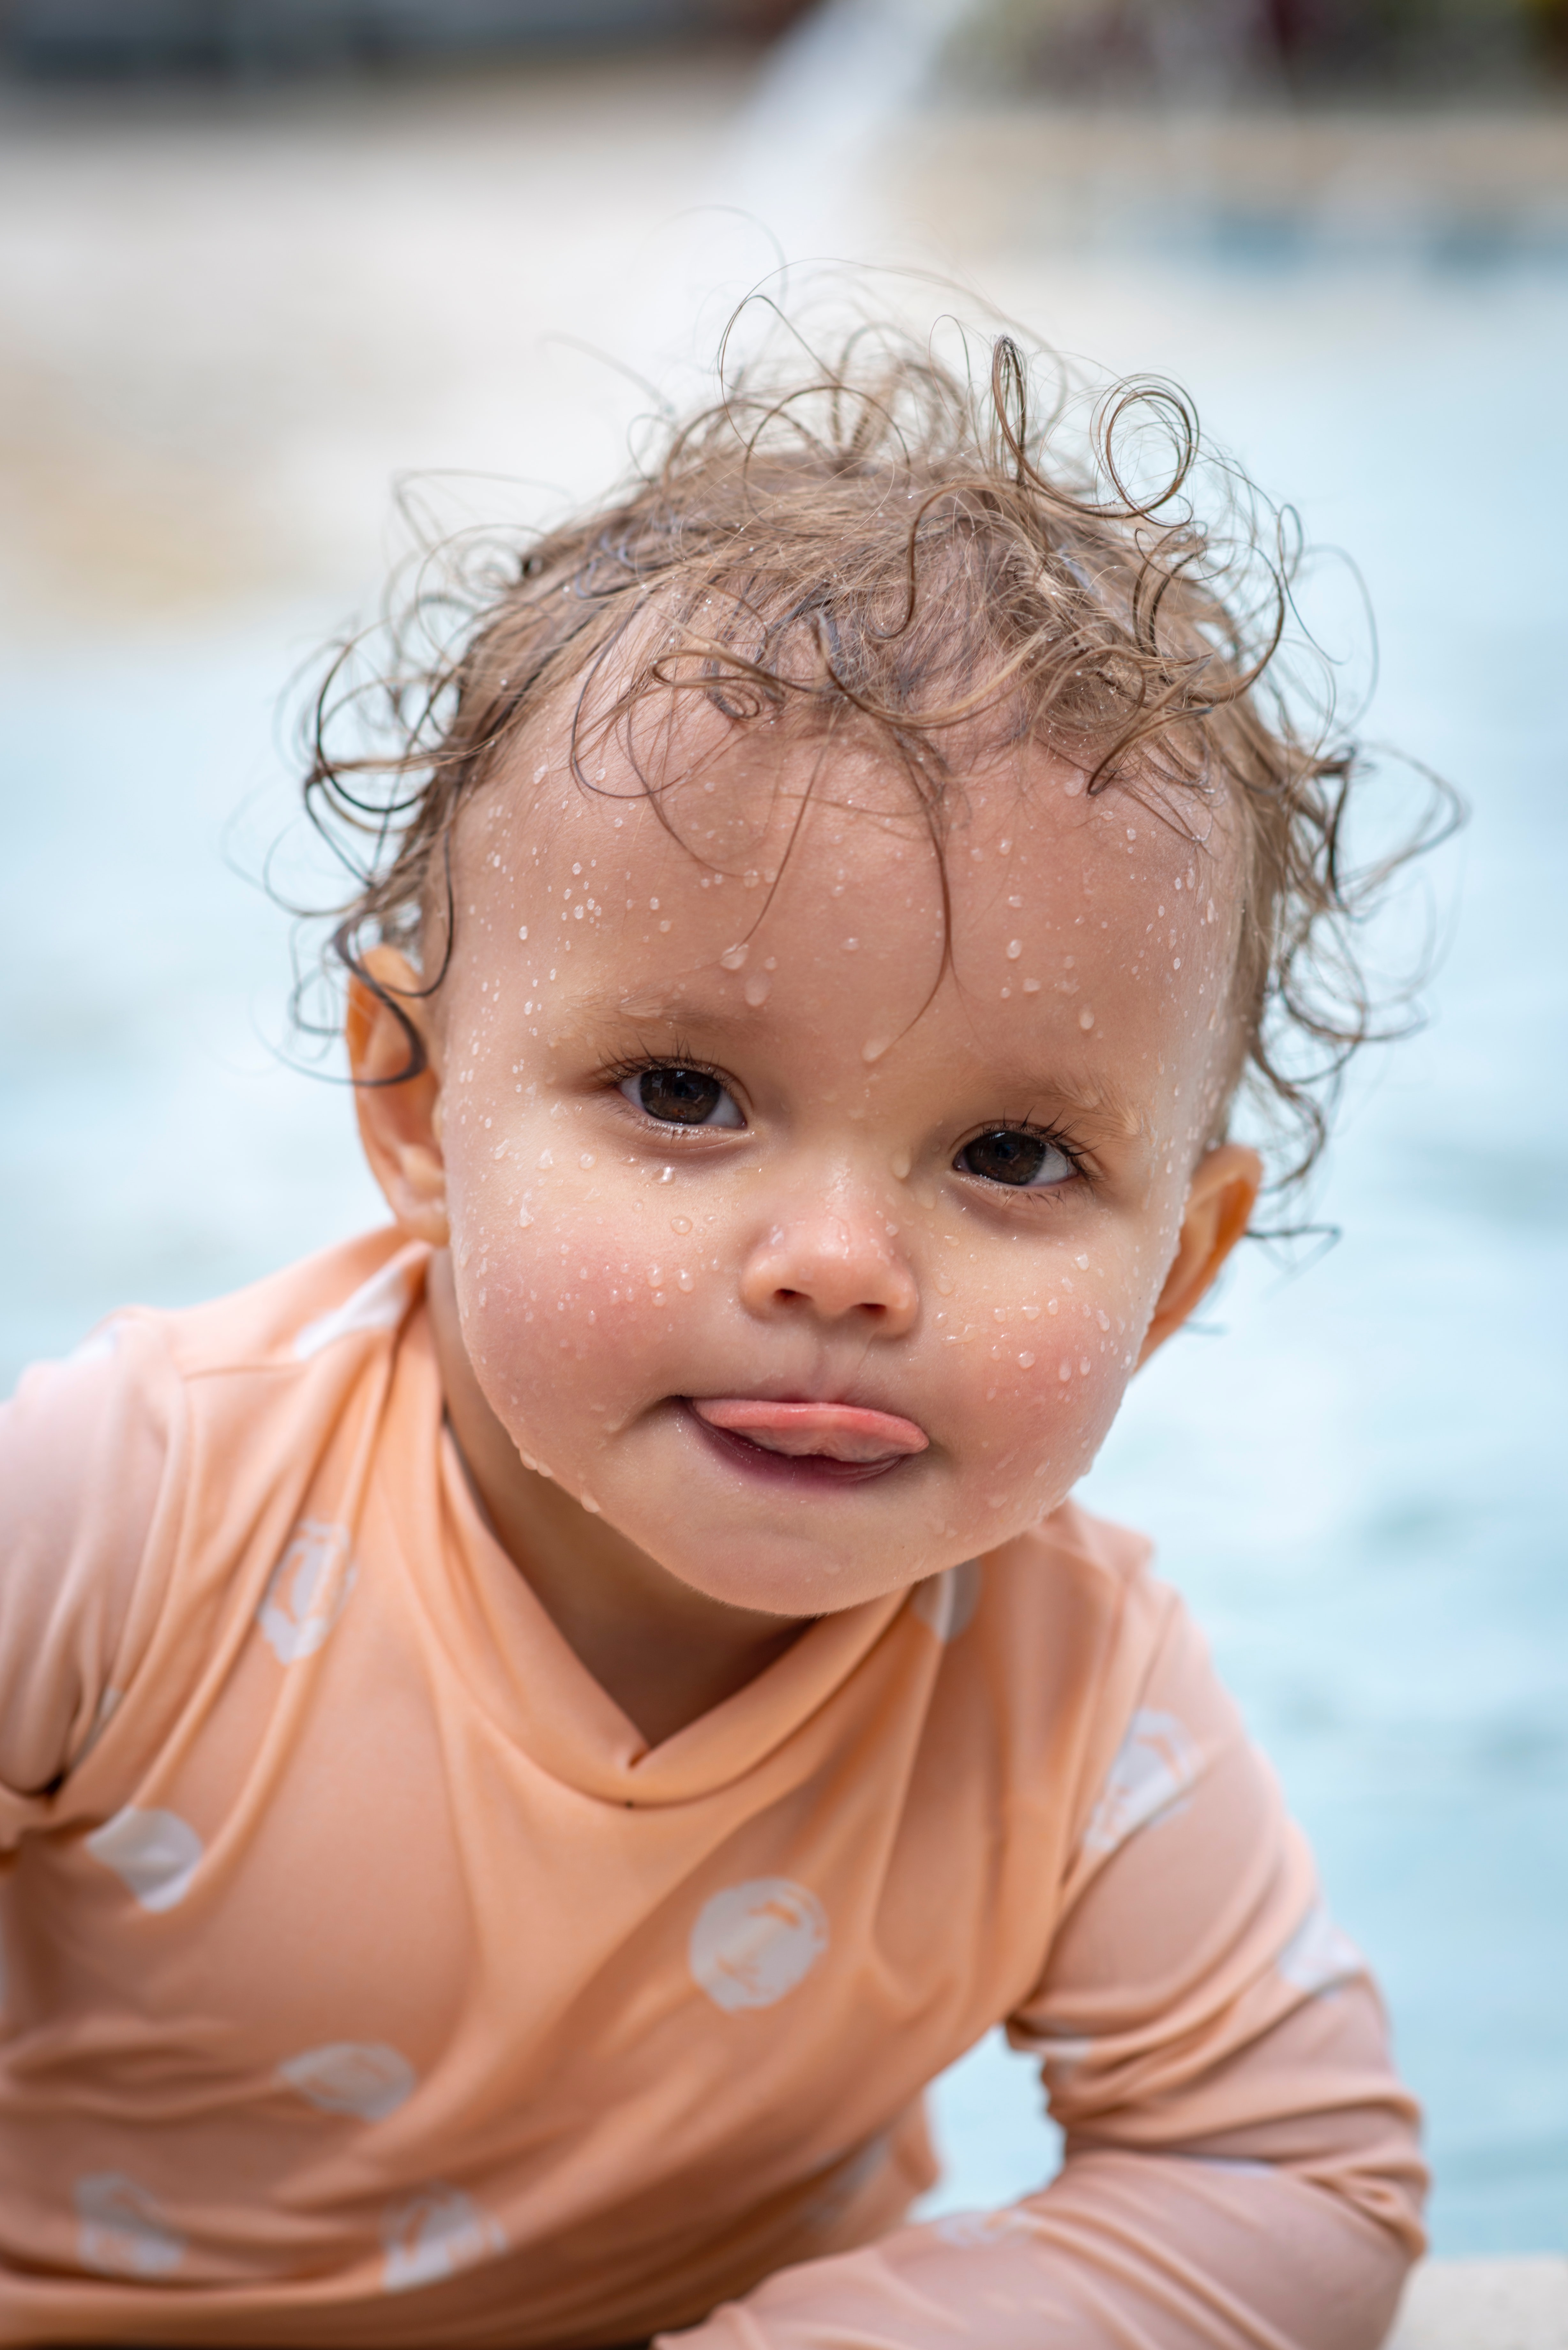 How to potty train toddler early - Toddler in swimming pool